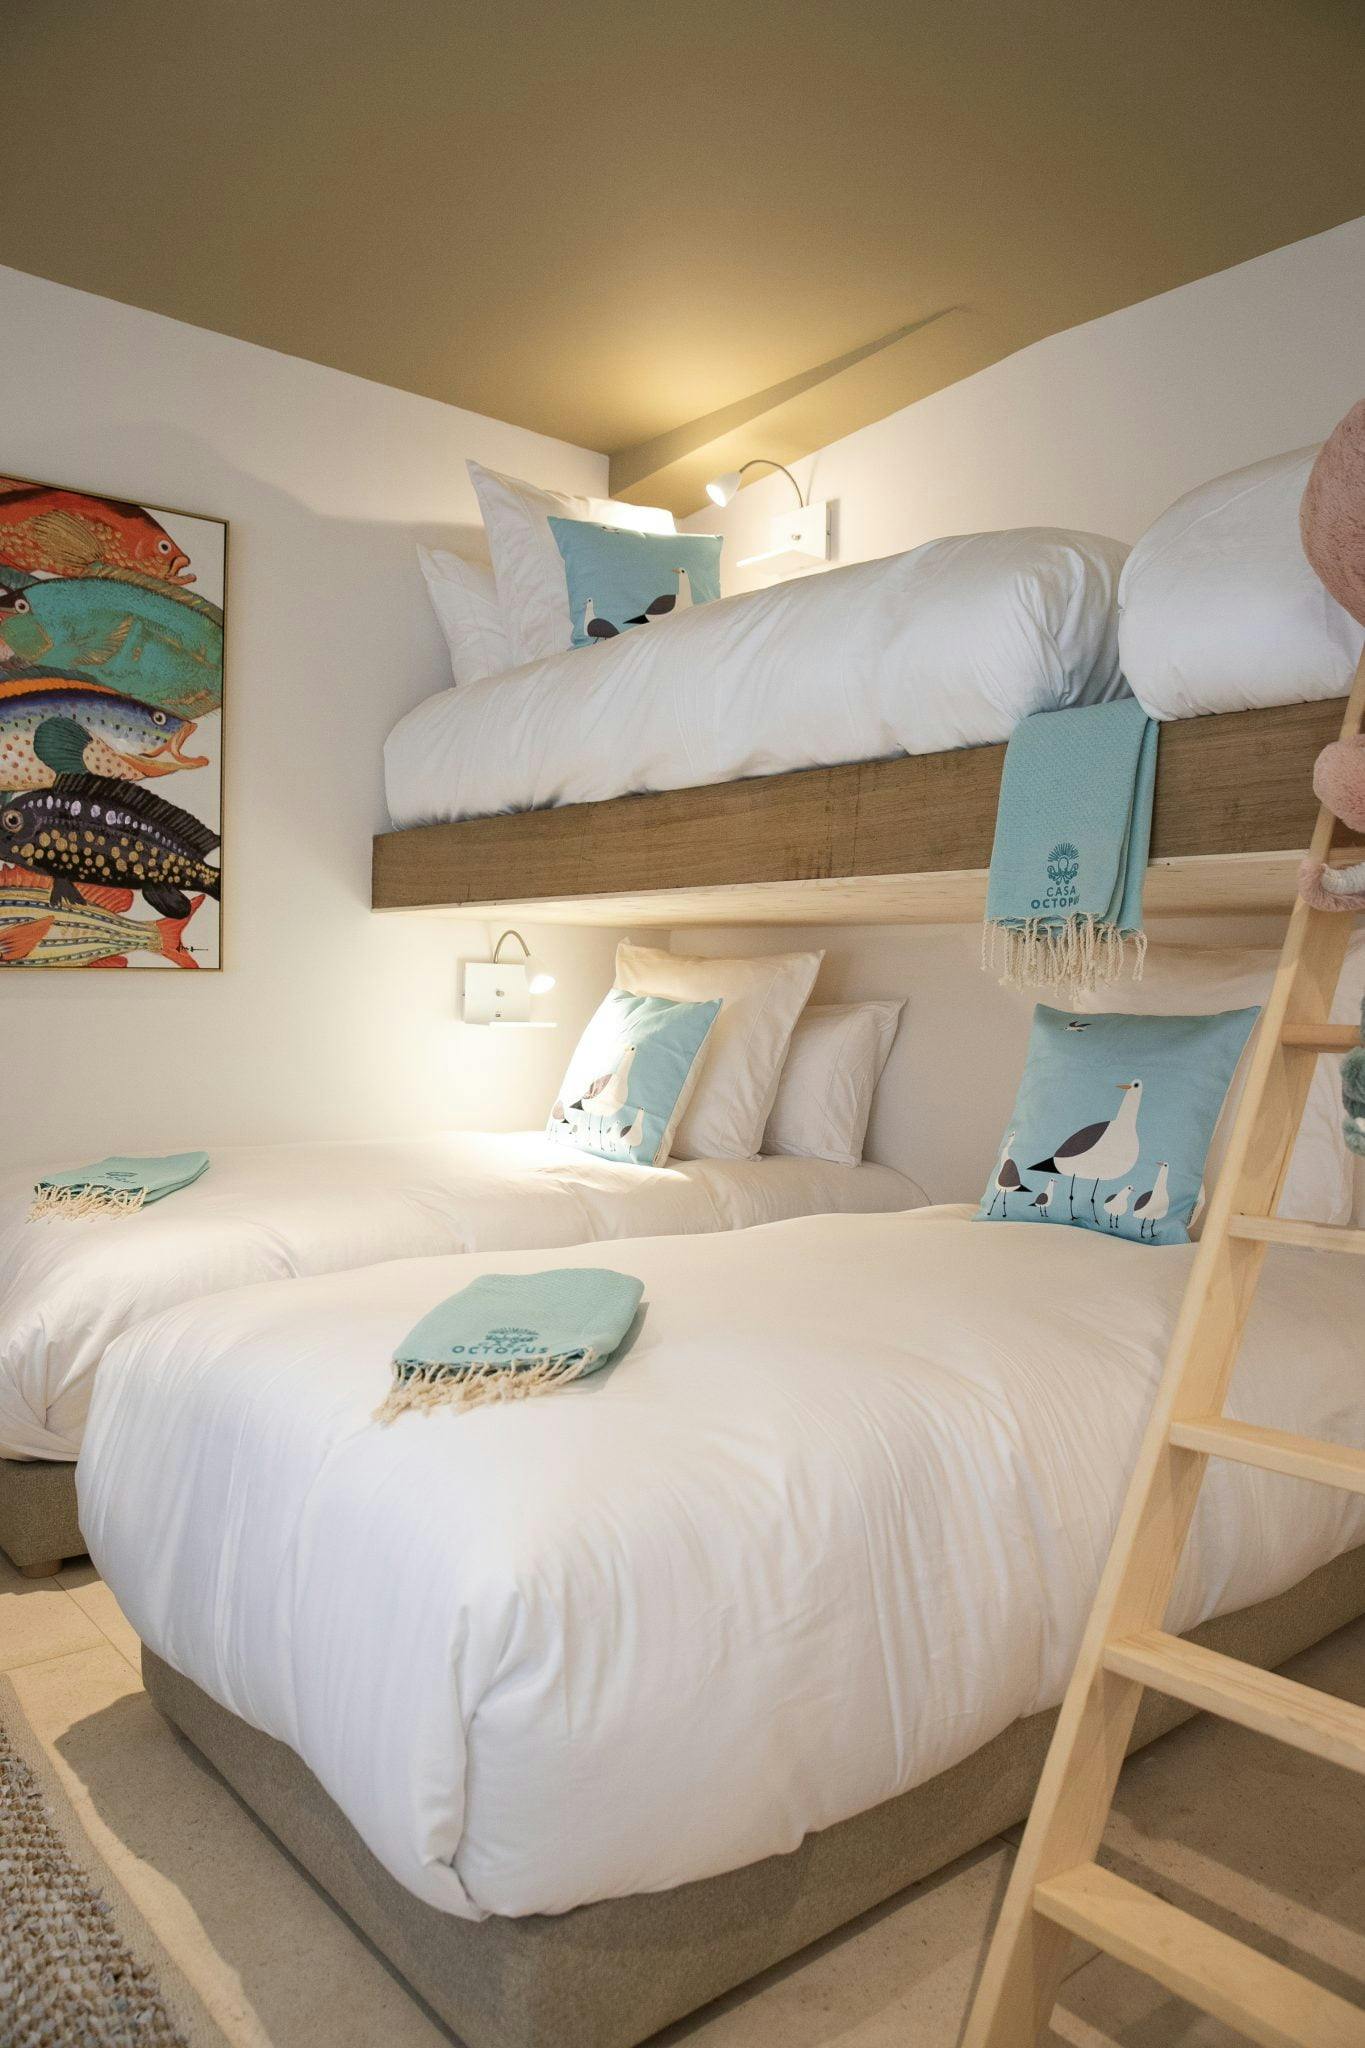 Children's bedroom with mezzanine beds and sea-themed décor